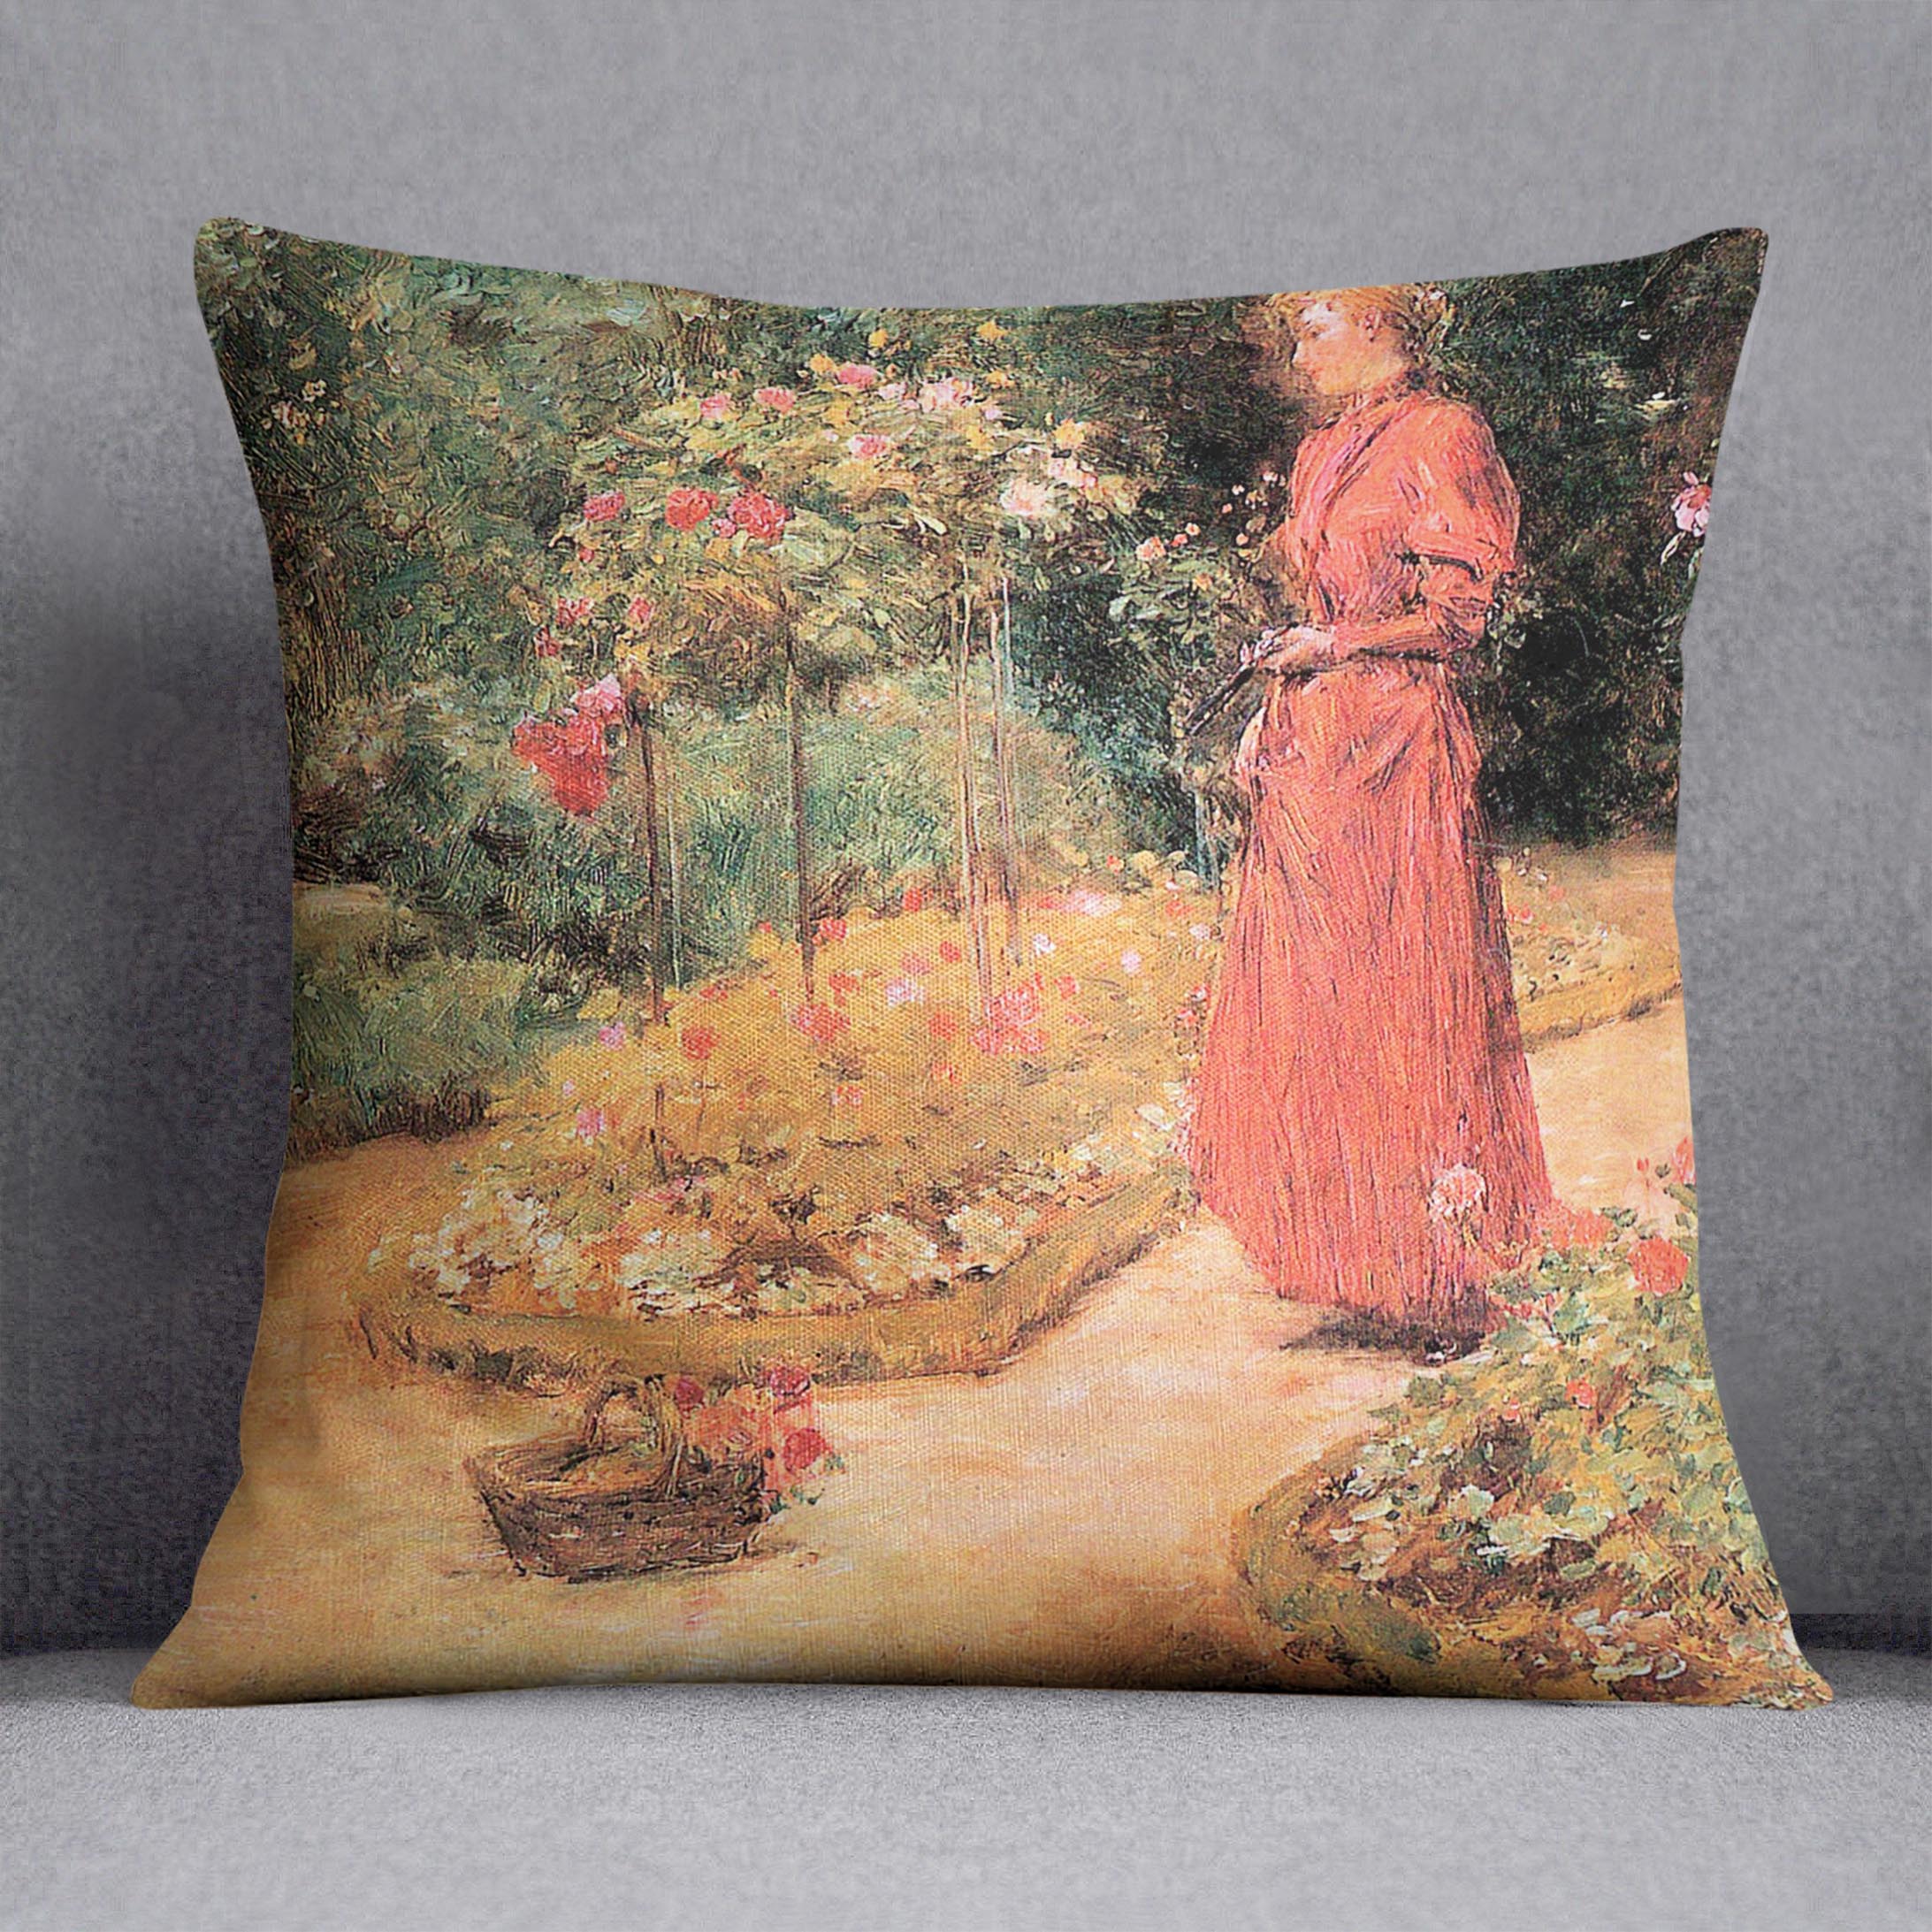 Woman cuts roses in a garden by Hassam Cushion - Canvas Art Rocks - 1